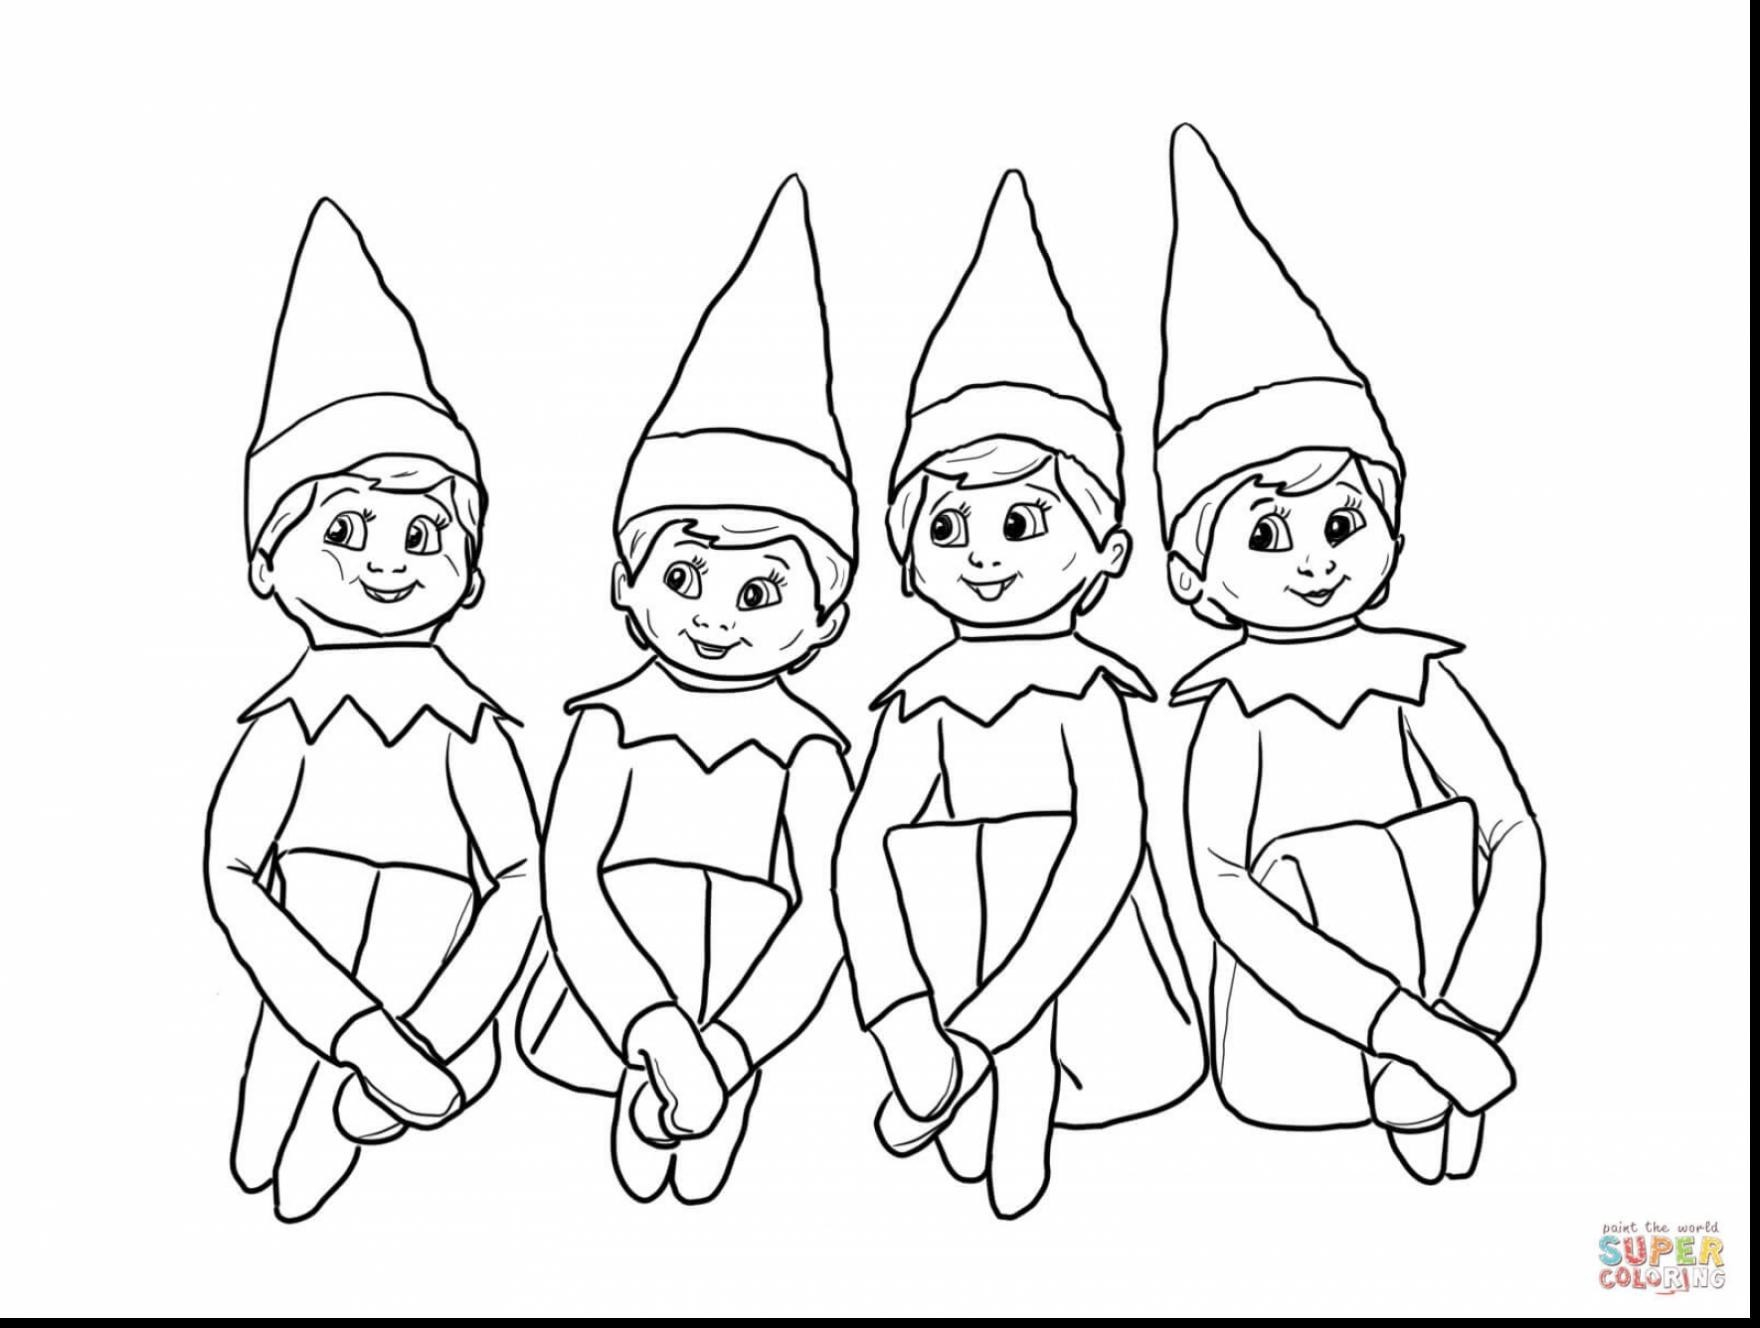 Christmas Elf Coloring Pages Elf Coloring For Adults Christmas Girl Working Page To Print Book Of